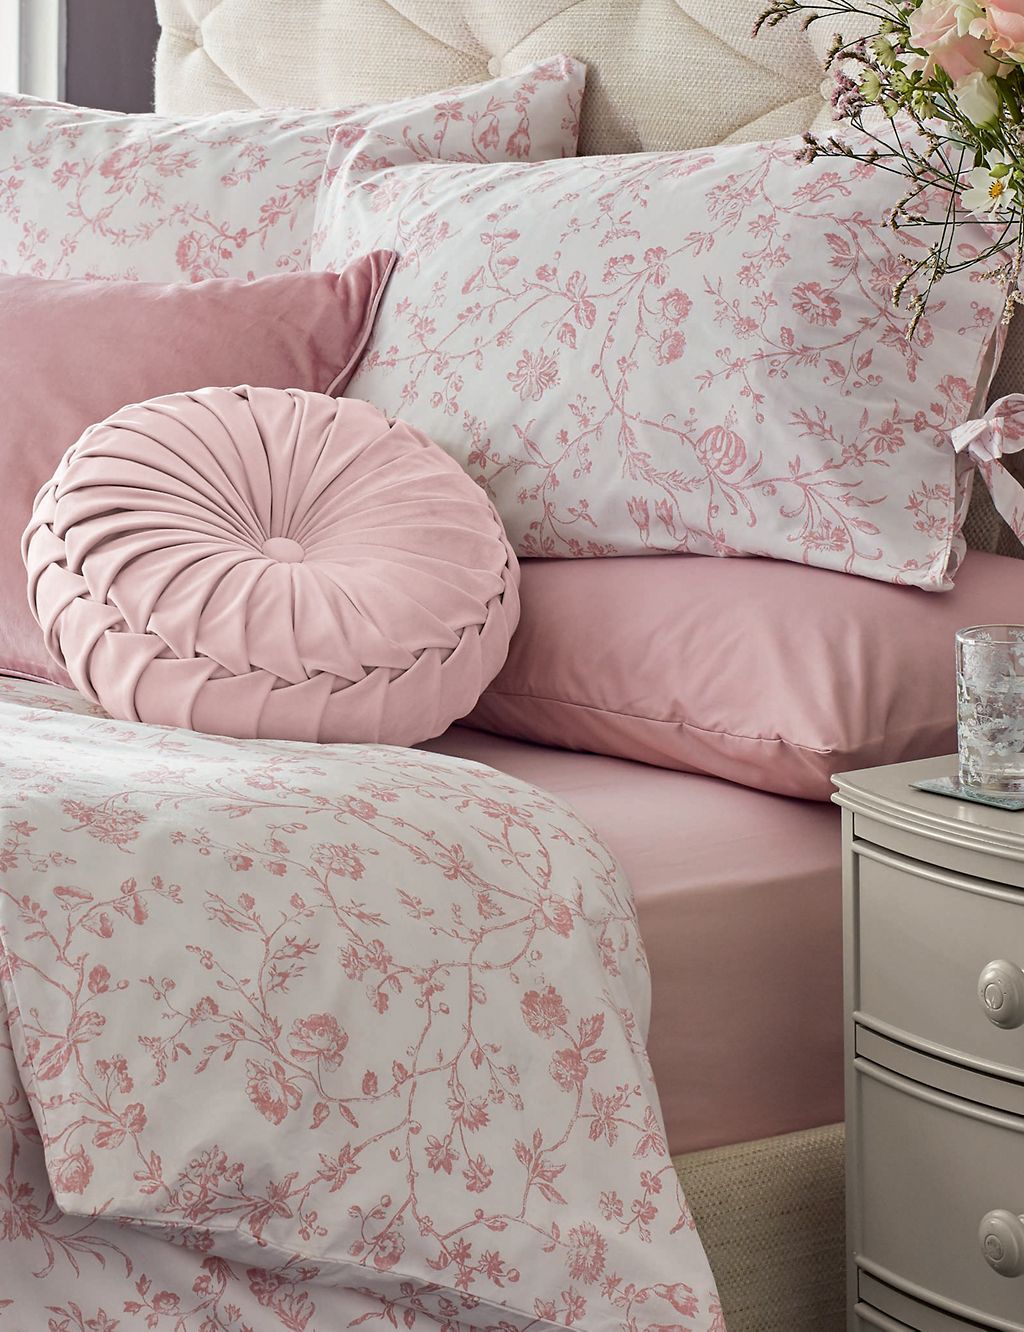 Cotton Percale Floral Bedding Set 1 of 2